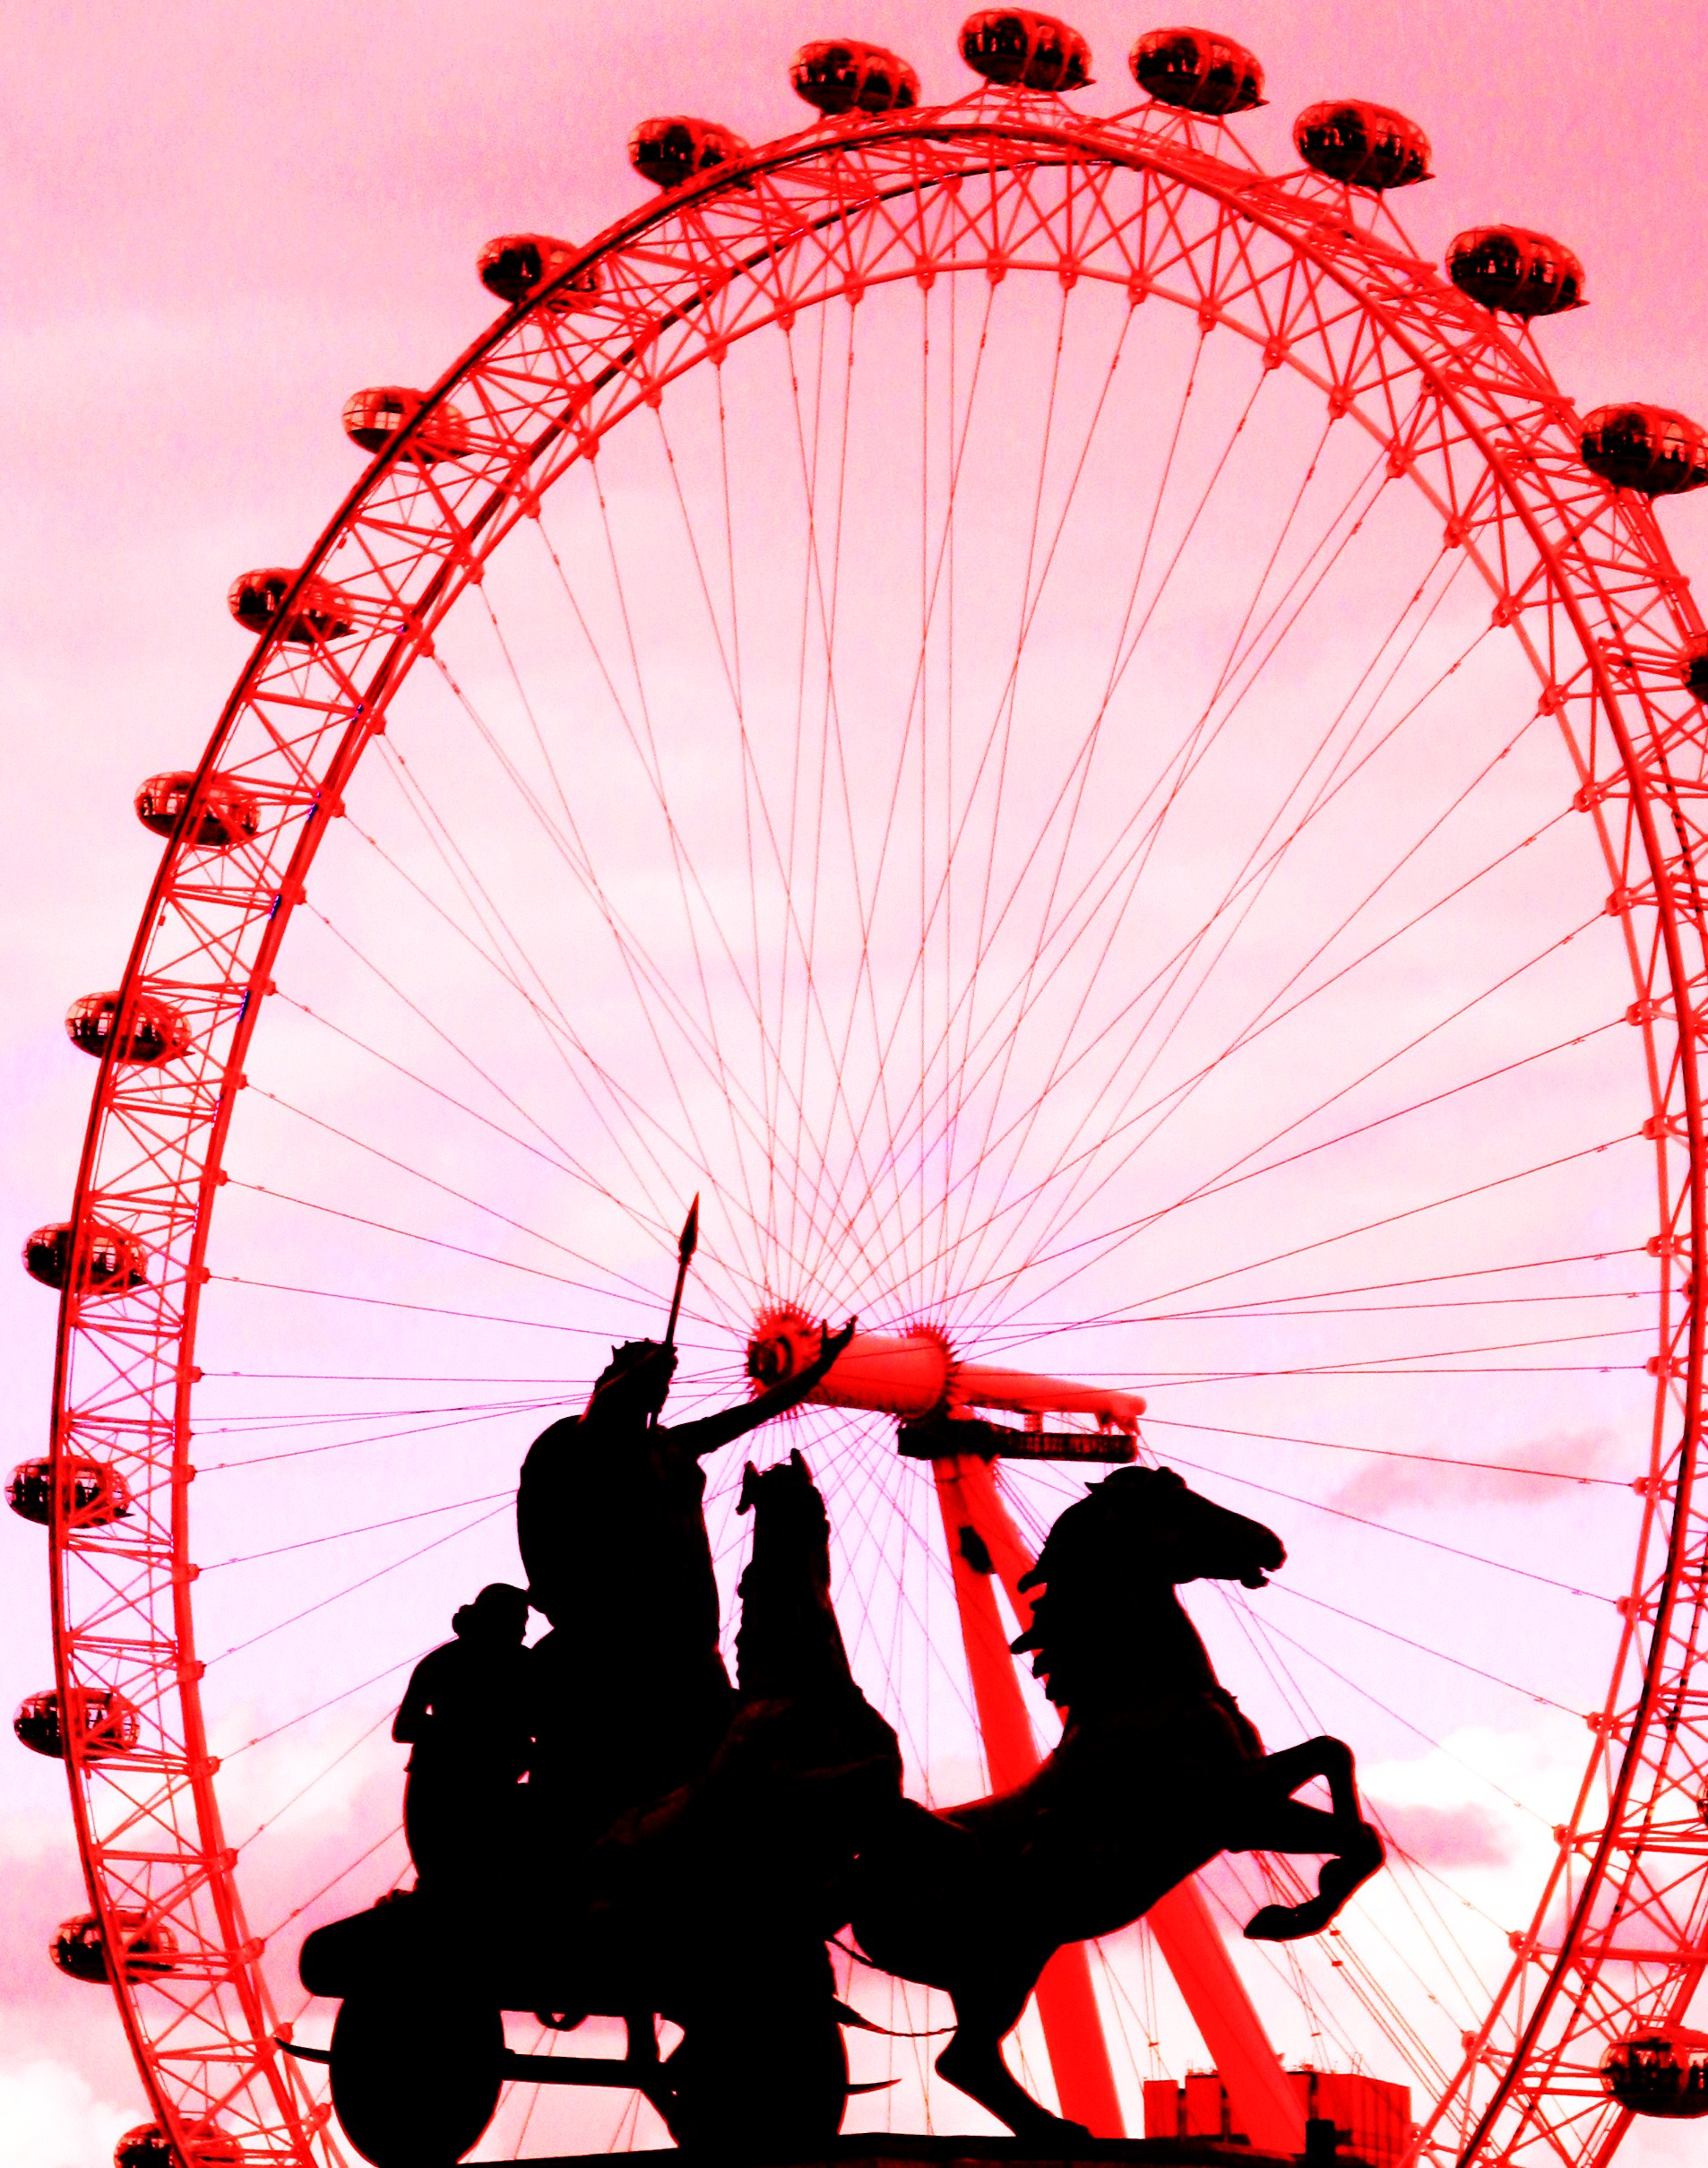 London Eye.jpg Contemporary Images of London Eye, London Eye Night photo, London Eye Pop Art Image, by PopArtMediaProductions